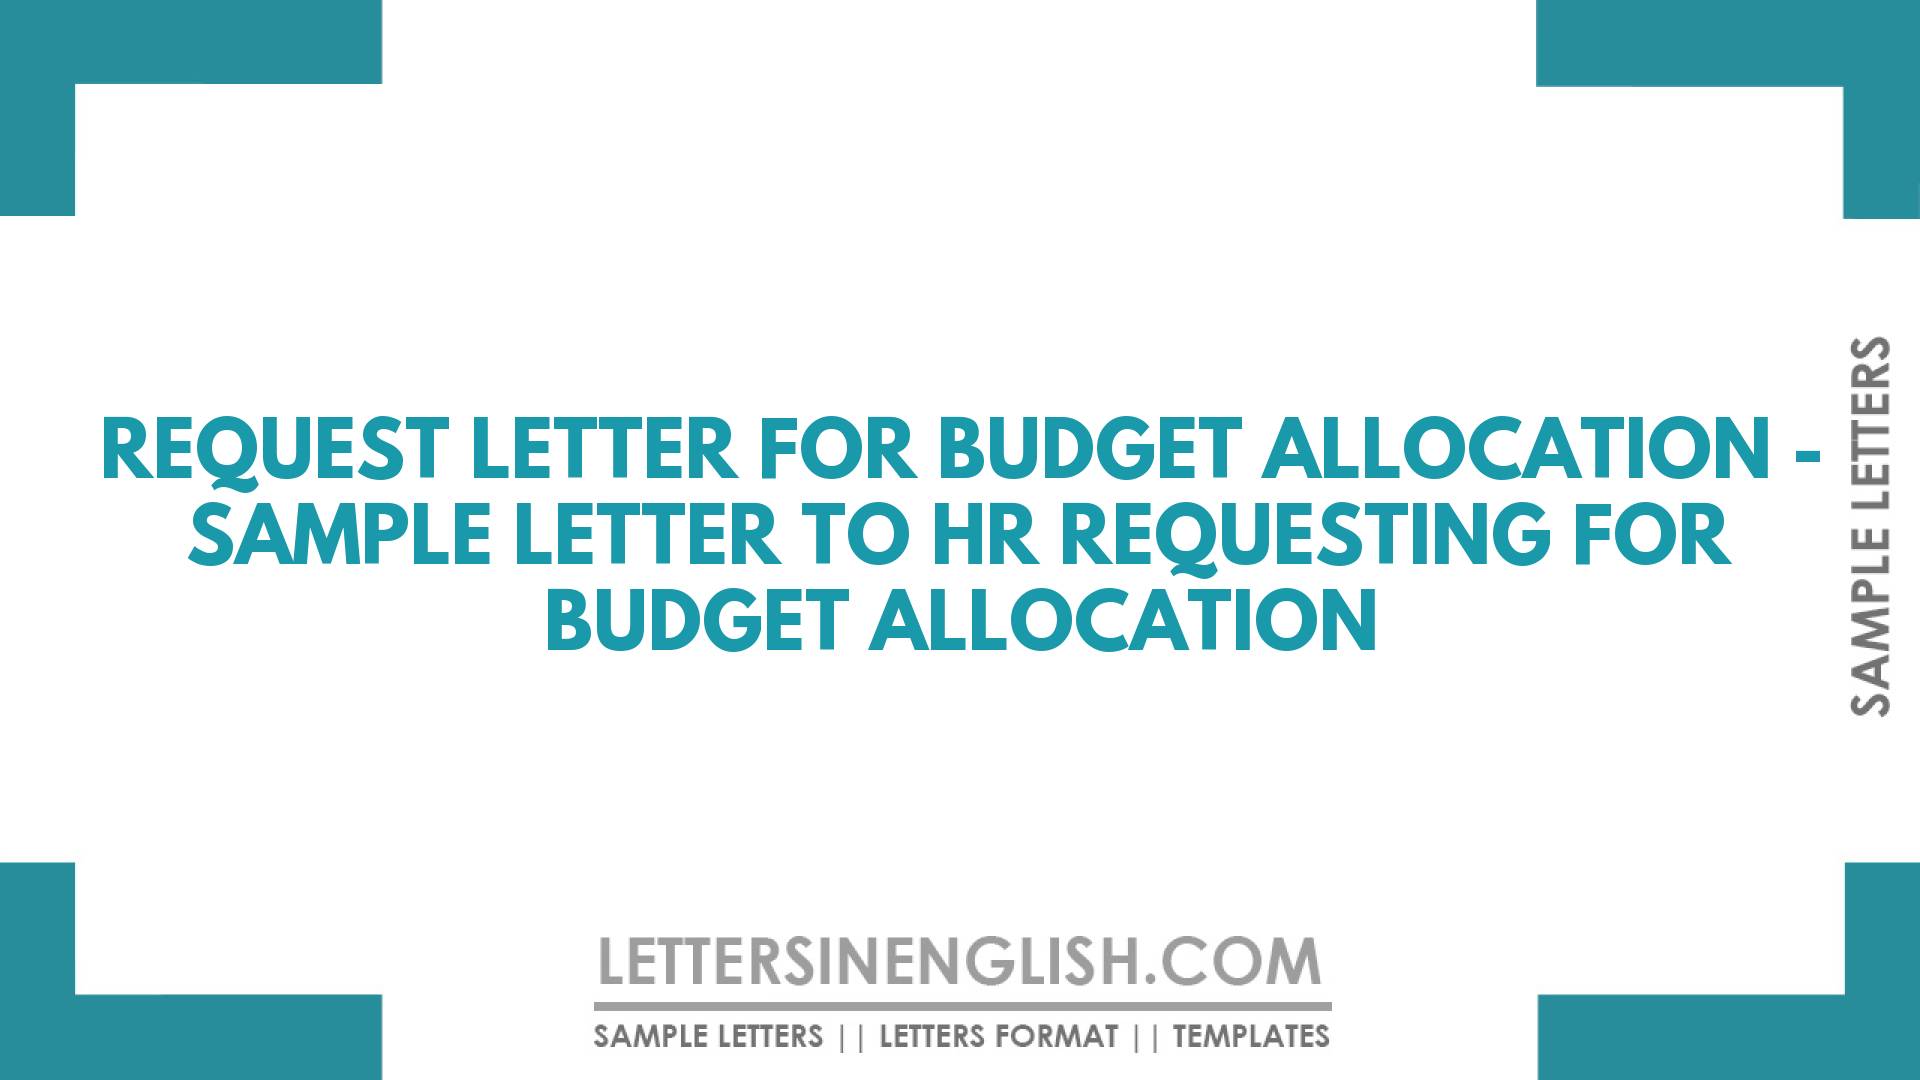 Request Letter for Budget Allocation – Sample Letter to HR Requesting for Budget Allocation